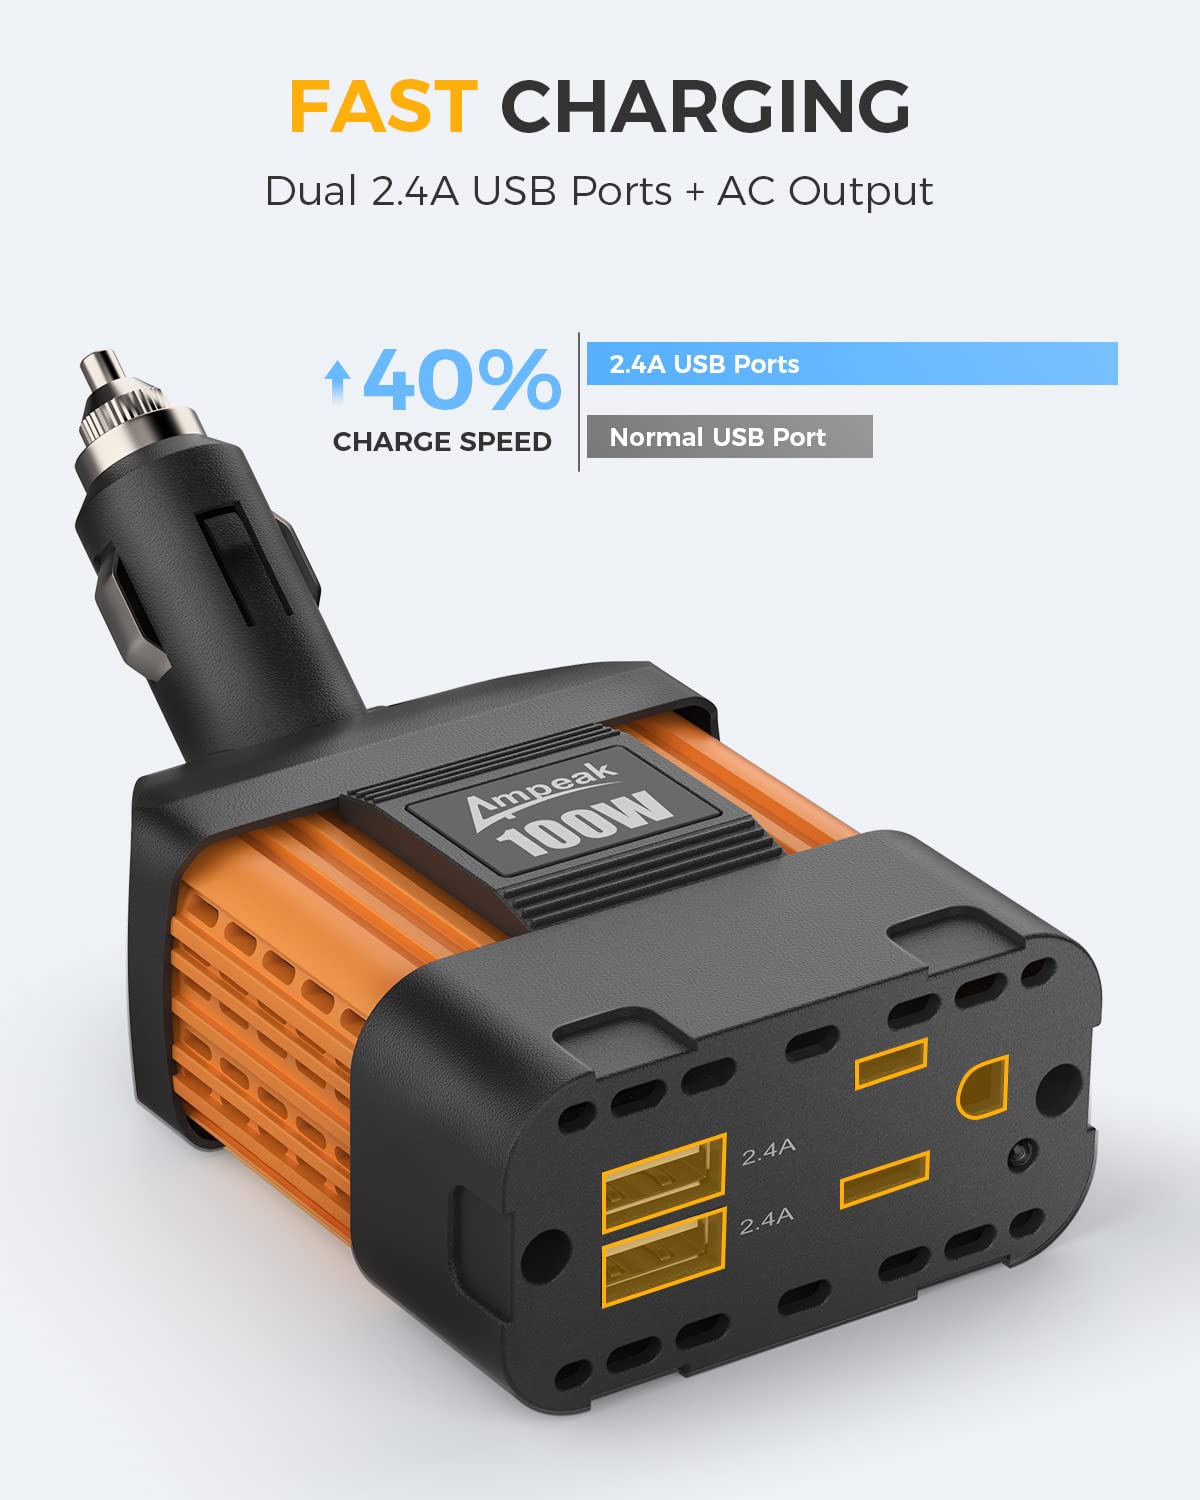 300W Power Inverter DC 12V To 110V AC Car Inverter With 5V 2.4A+3A And 2USB  Car Adapters